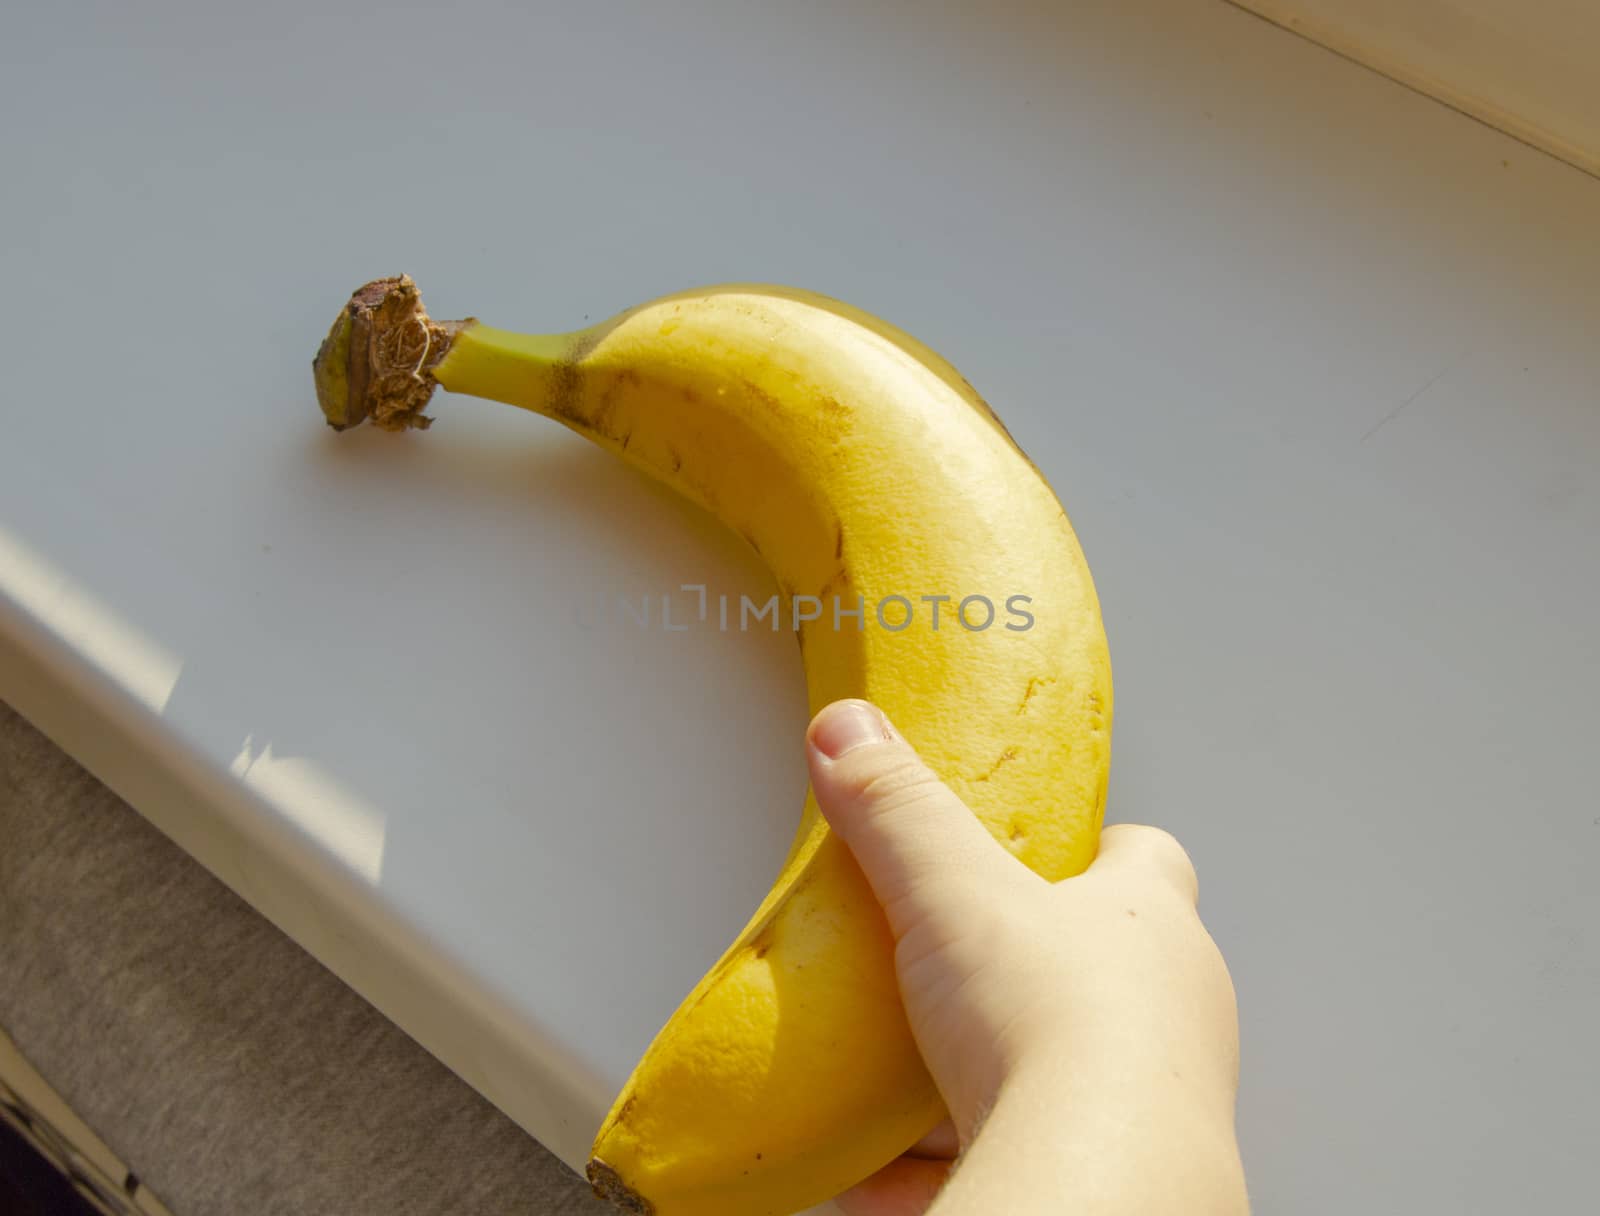 Healthy food for kids. Children's hand holding a banana, close-up, sunlight. by claire_lucia